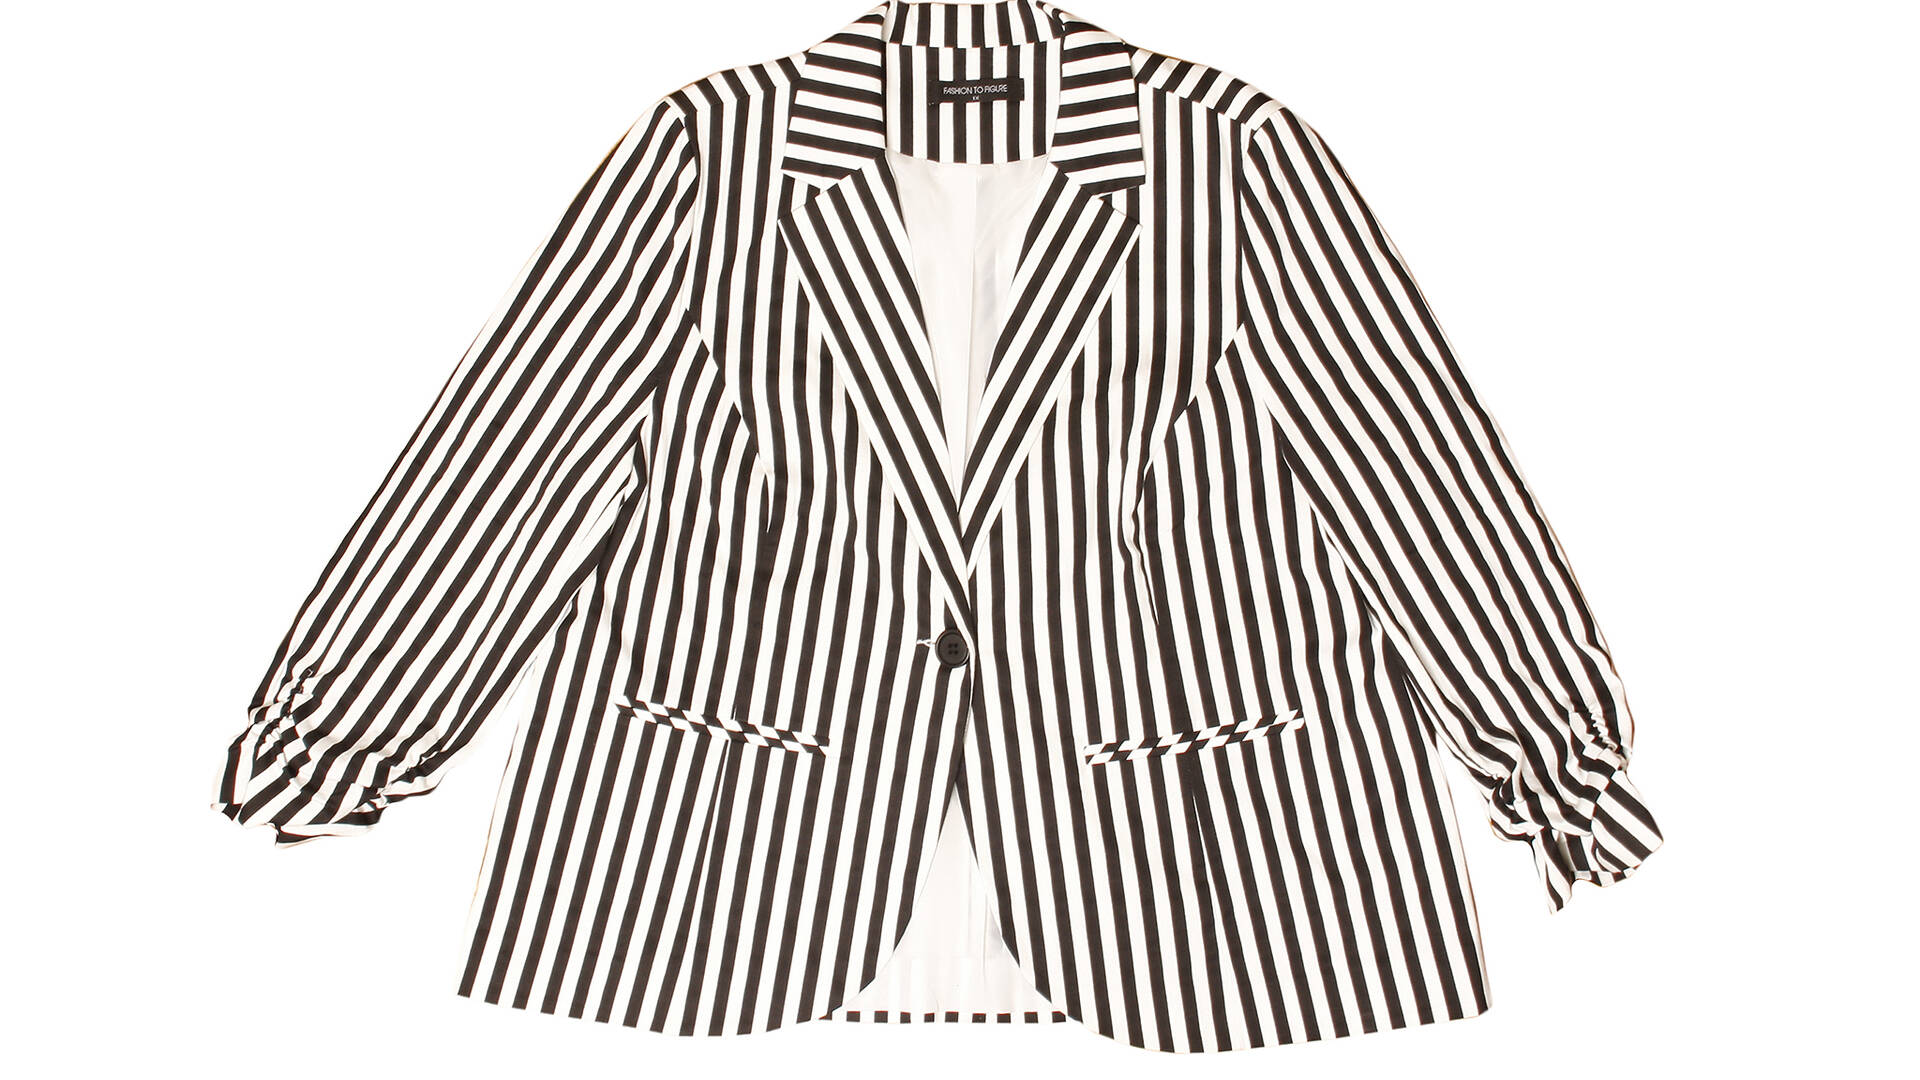 Best blazers for women fall 2013: Floral, striped and solid jackets